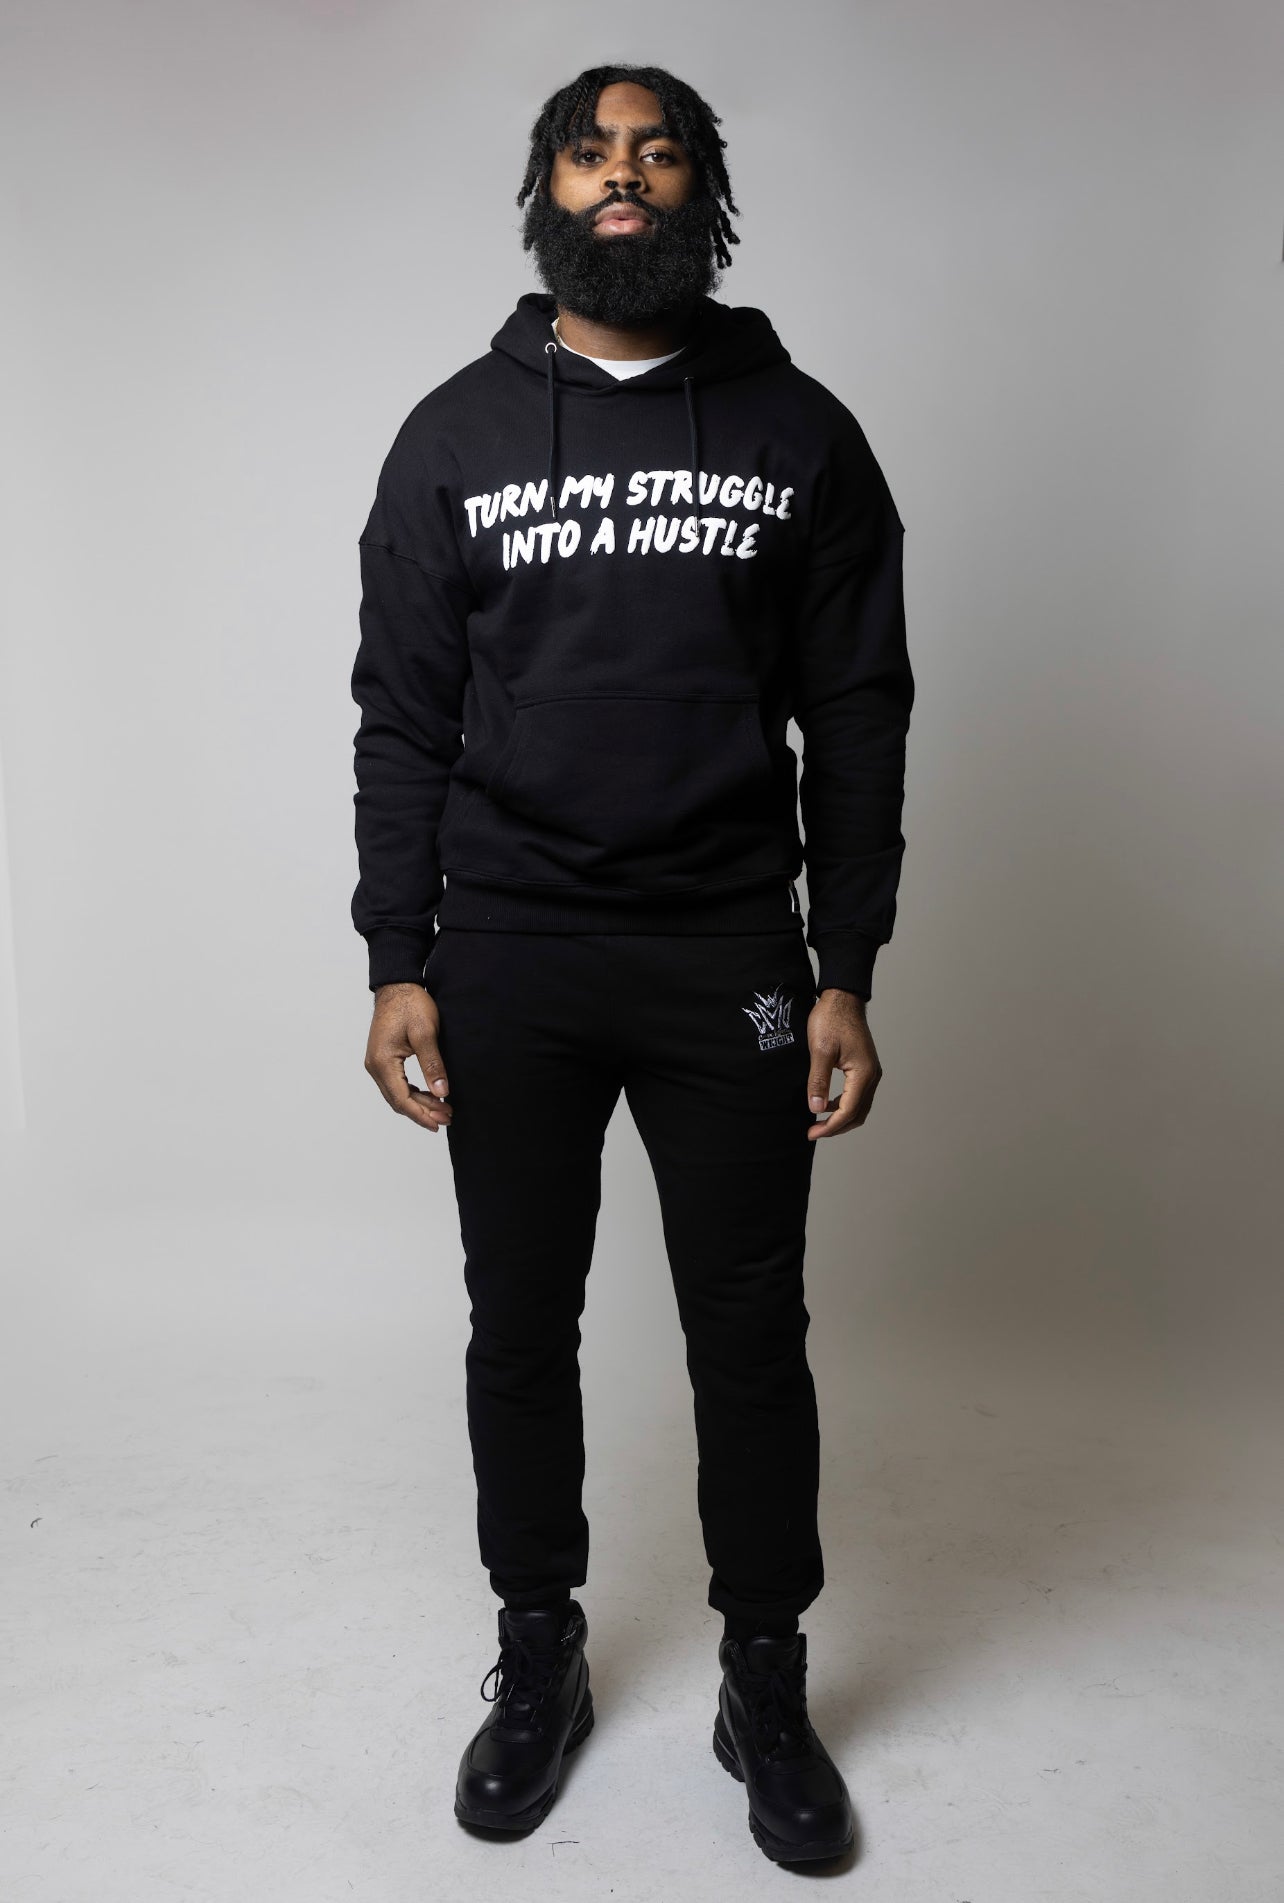 Turn My Struggle Into a Hustle Puff Hoodie – Carry My Own Weight